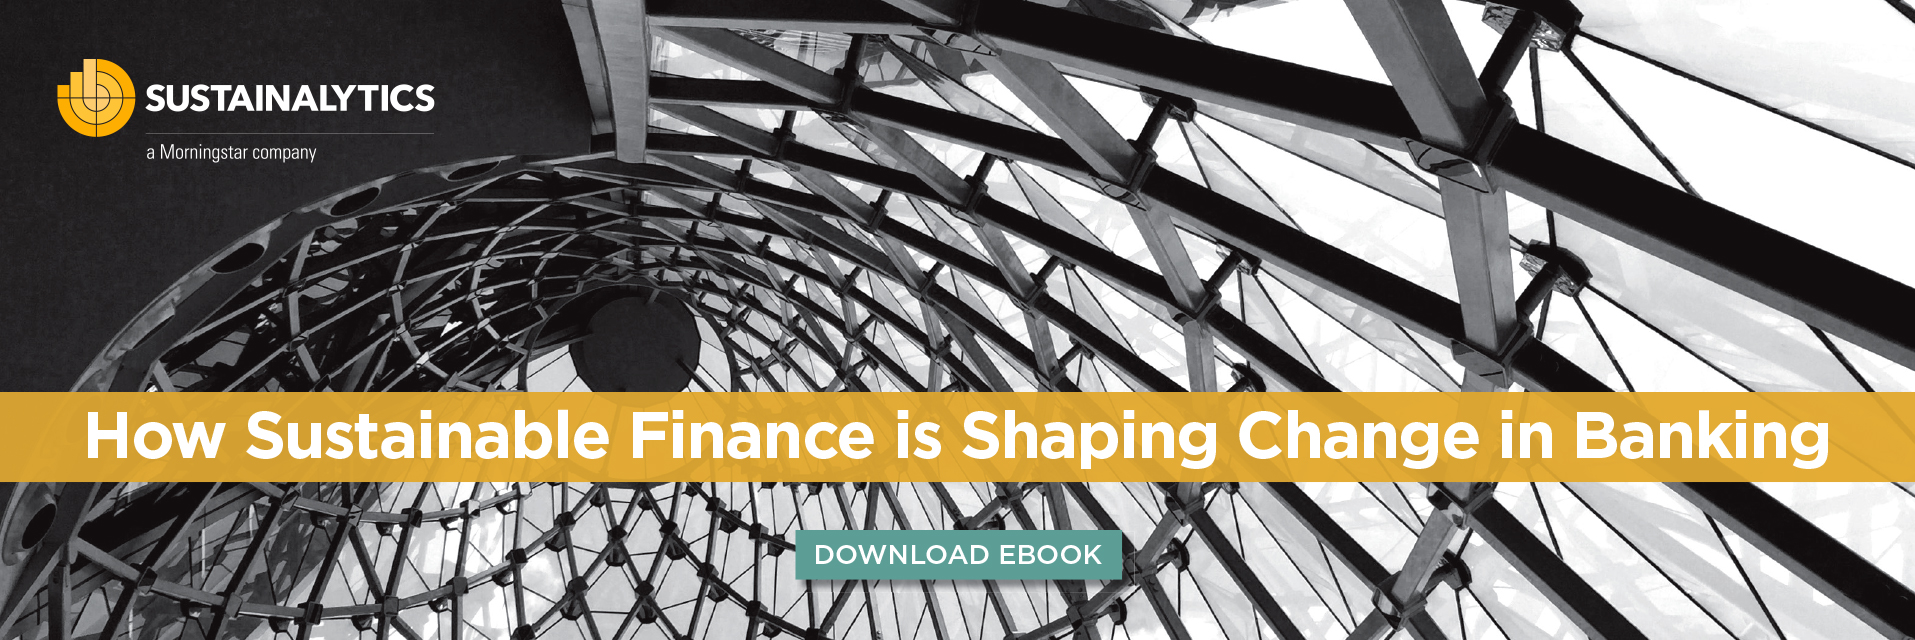 Click here to download our ebook, How Sustainable Finance is Shaping Change in Banking